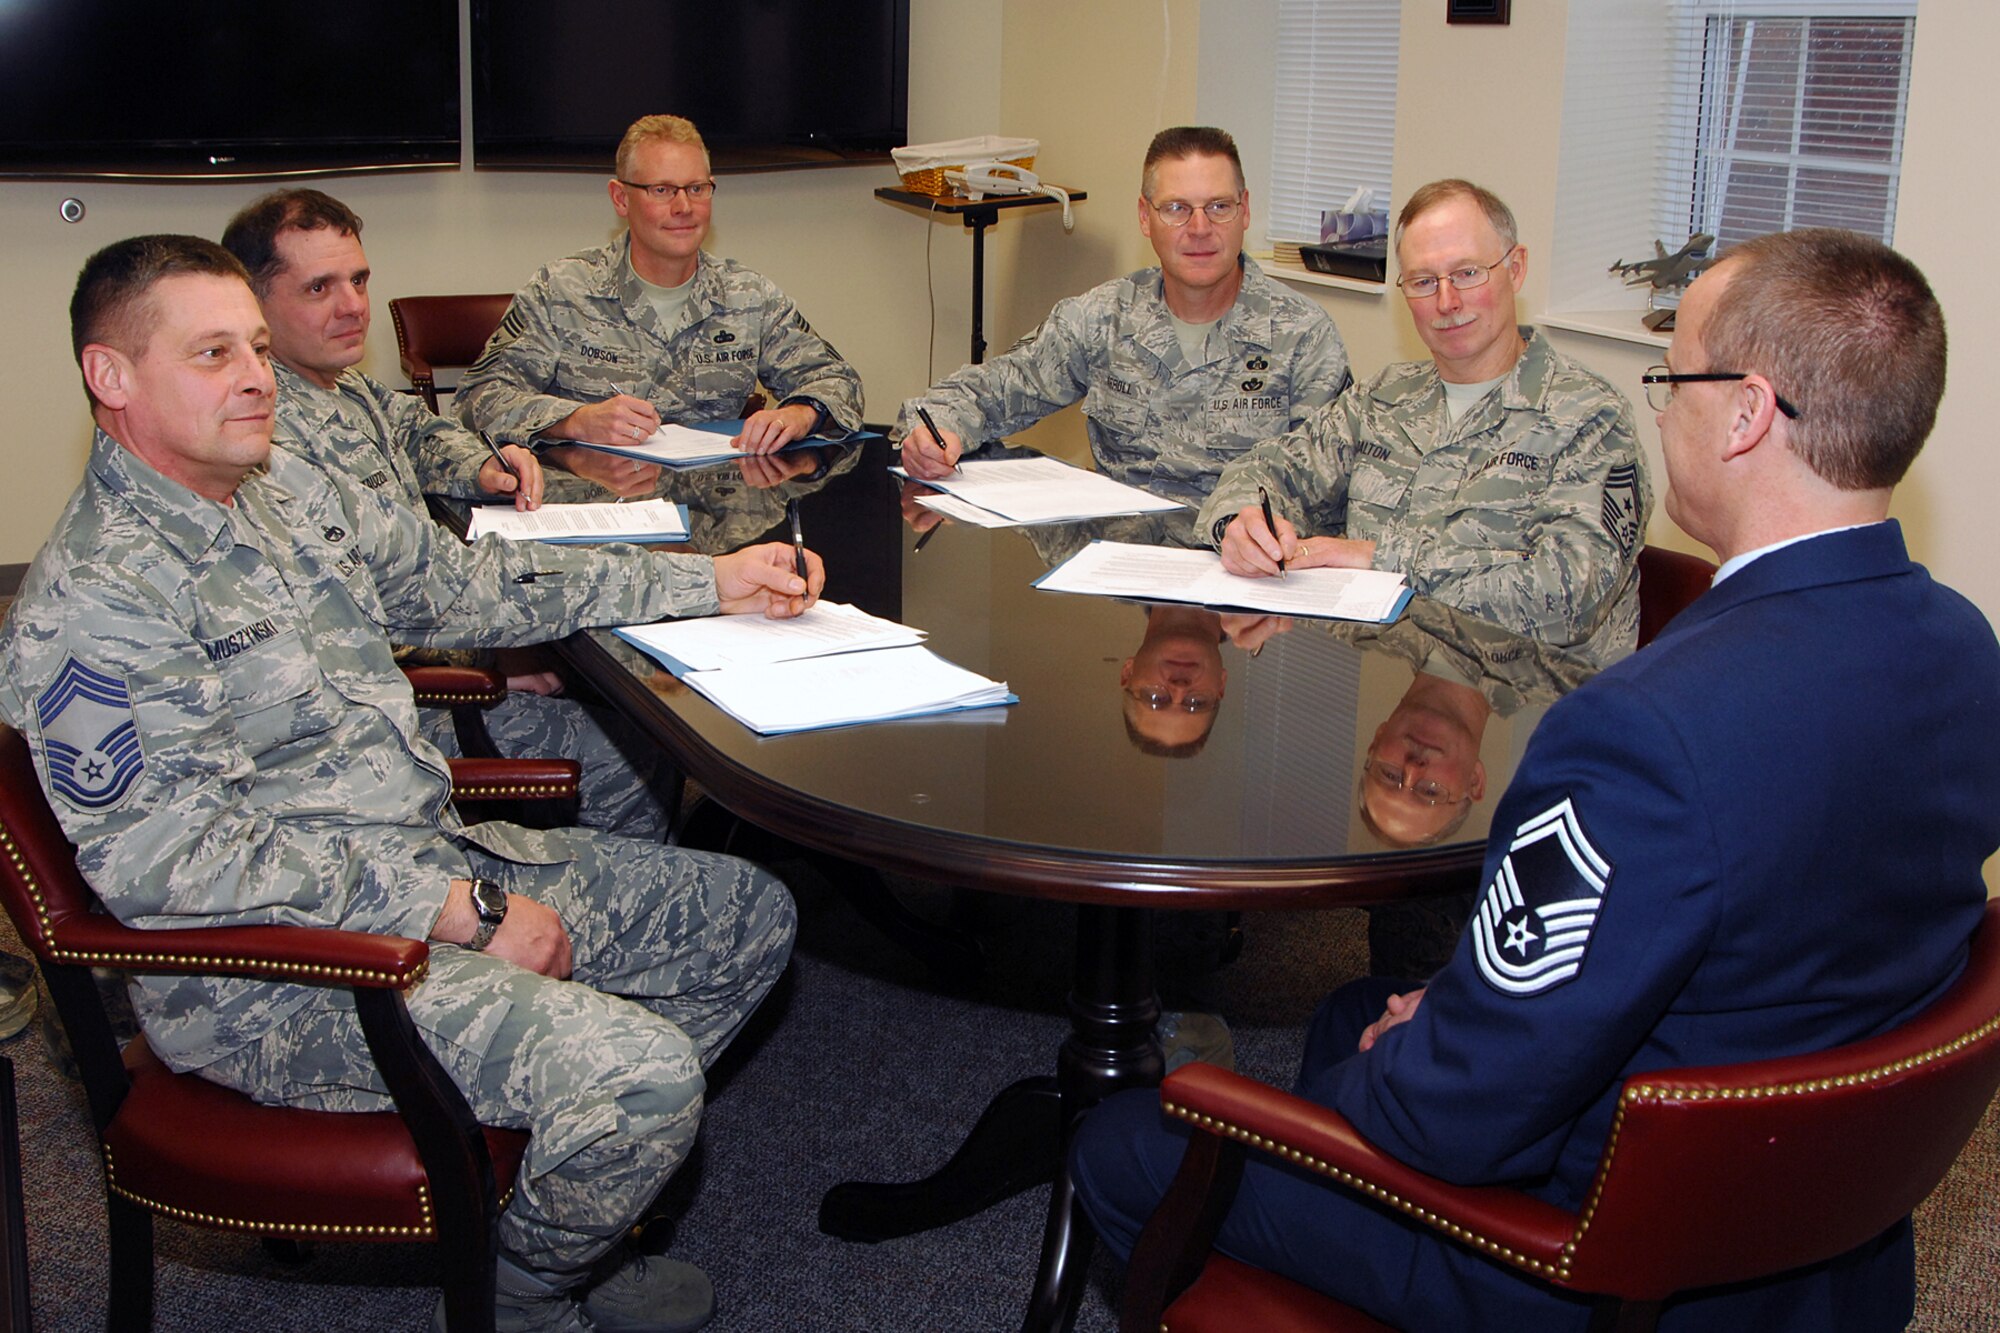 Senior Master Sgt. Jim Hart, 191st Maintenance Squadron, meets with a promotion board at Selfridge Air National Guard Base, Dec. 14, 2011. Hart met with the board as a candidate for promotion to chief master sergeant, the highest enlisted rank in the U.S. Air Force. Making up the board are (from left) Chief Master Sgt. Terry Muszynski, 127th Logistics Readiness Squadron; Chief Master Sgt. Gary Fantauzzo, 127th Force Support Squadron; Chief Master Sgt. Robert Dobson, 127th Wing command chief; and Chief Master Sgt. Mike Carroll, 127th Civil Engineer Squadron. Also sitting in as an observer was Chief Master Sgt. Mike Dalton, command chief for the Michigan Air National Guard. Hart said he studied the “Little Brown Book” – Air Force Instruction 36-2618 “The Enlisted Force Structure” – to prepare for his meeting with the board. (U.S. Air Force photo by John S. Swanson)